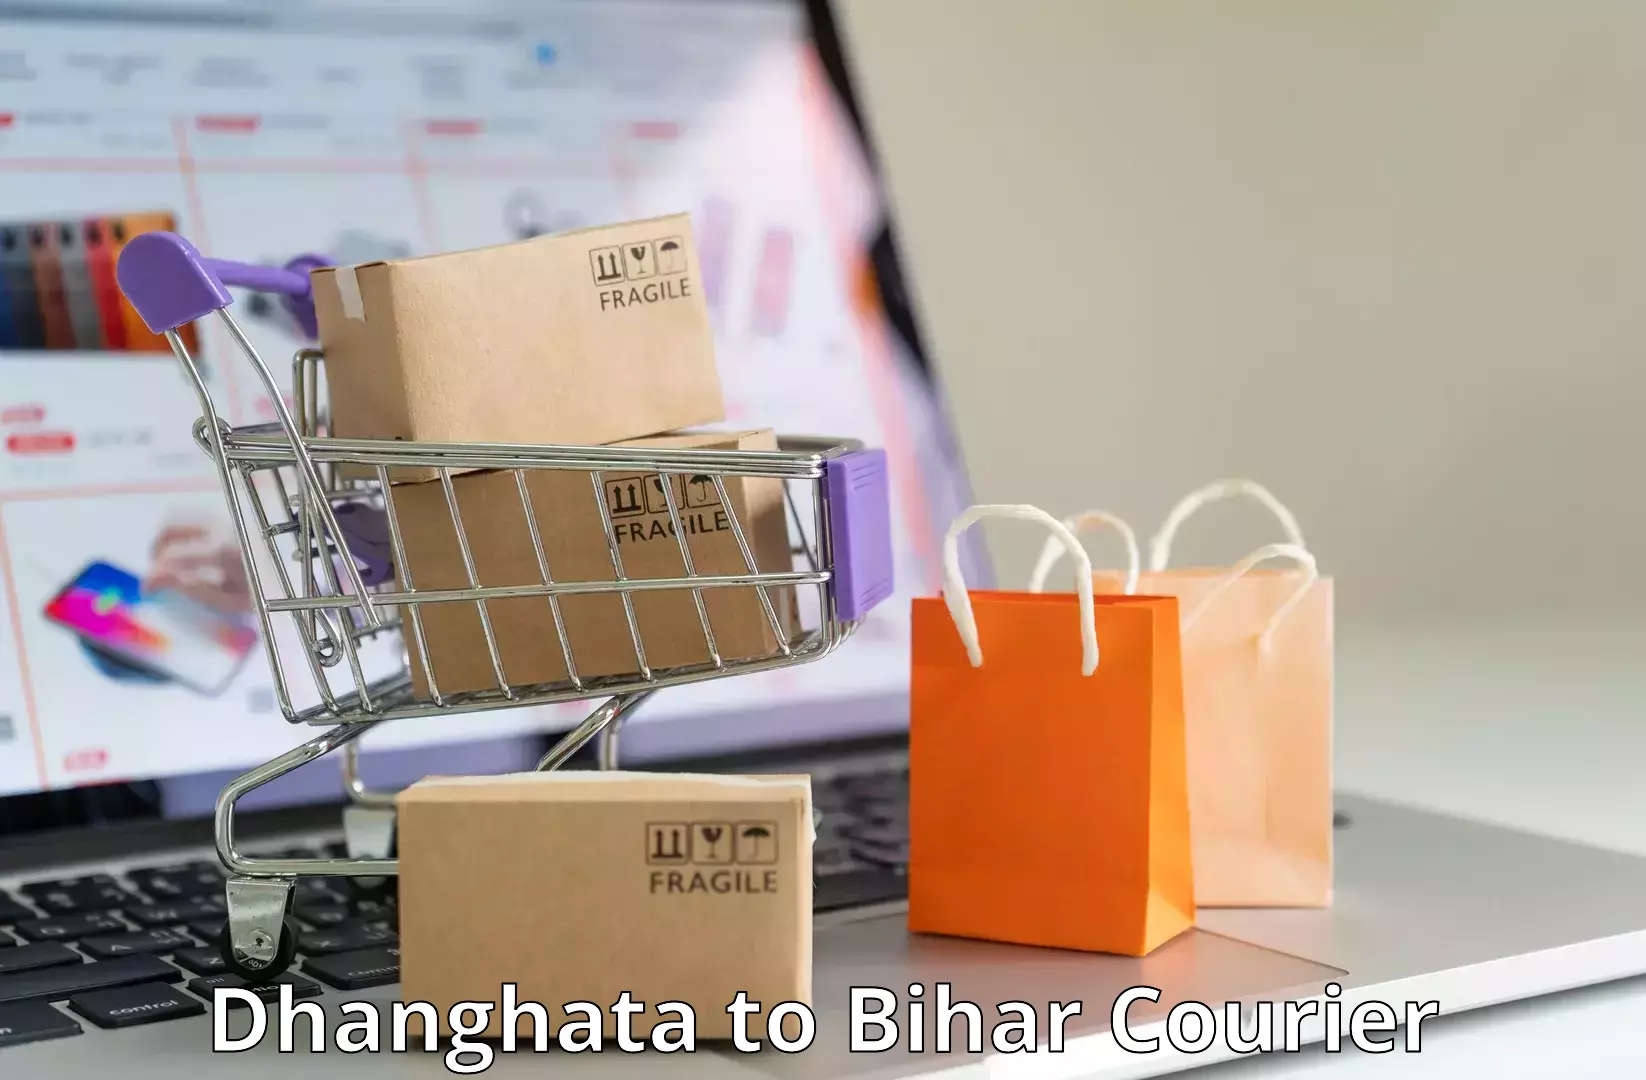 Courier service efficiency Dhanghata to Alamnagar